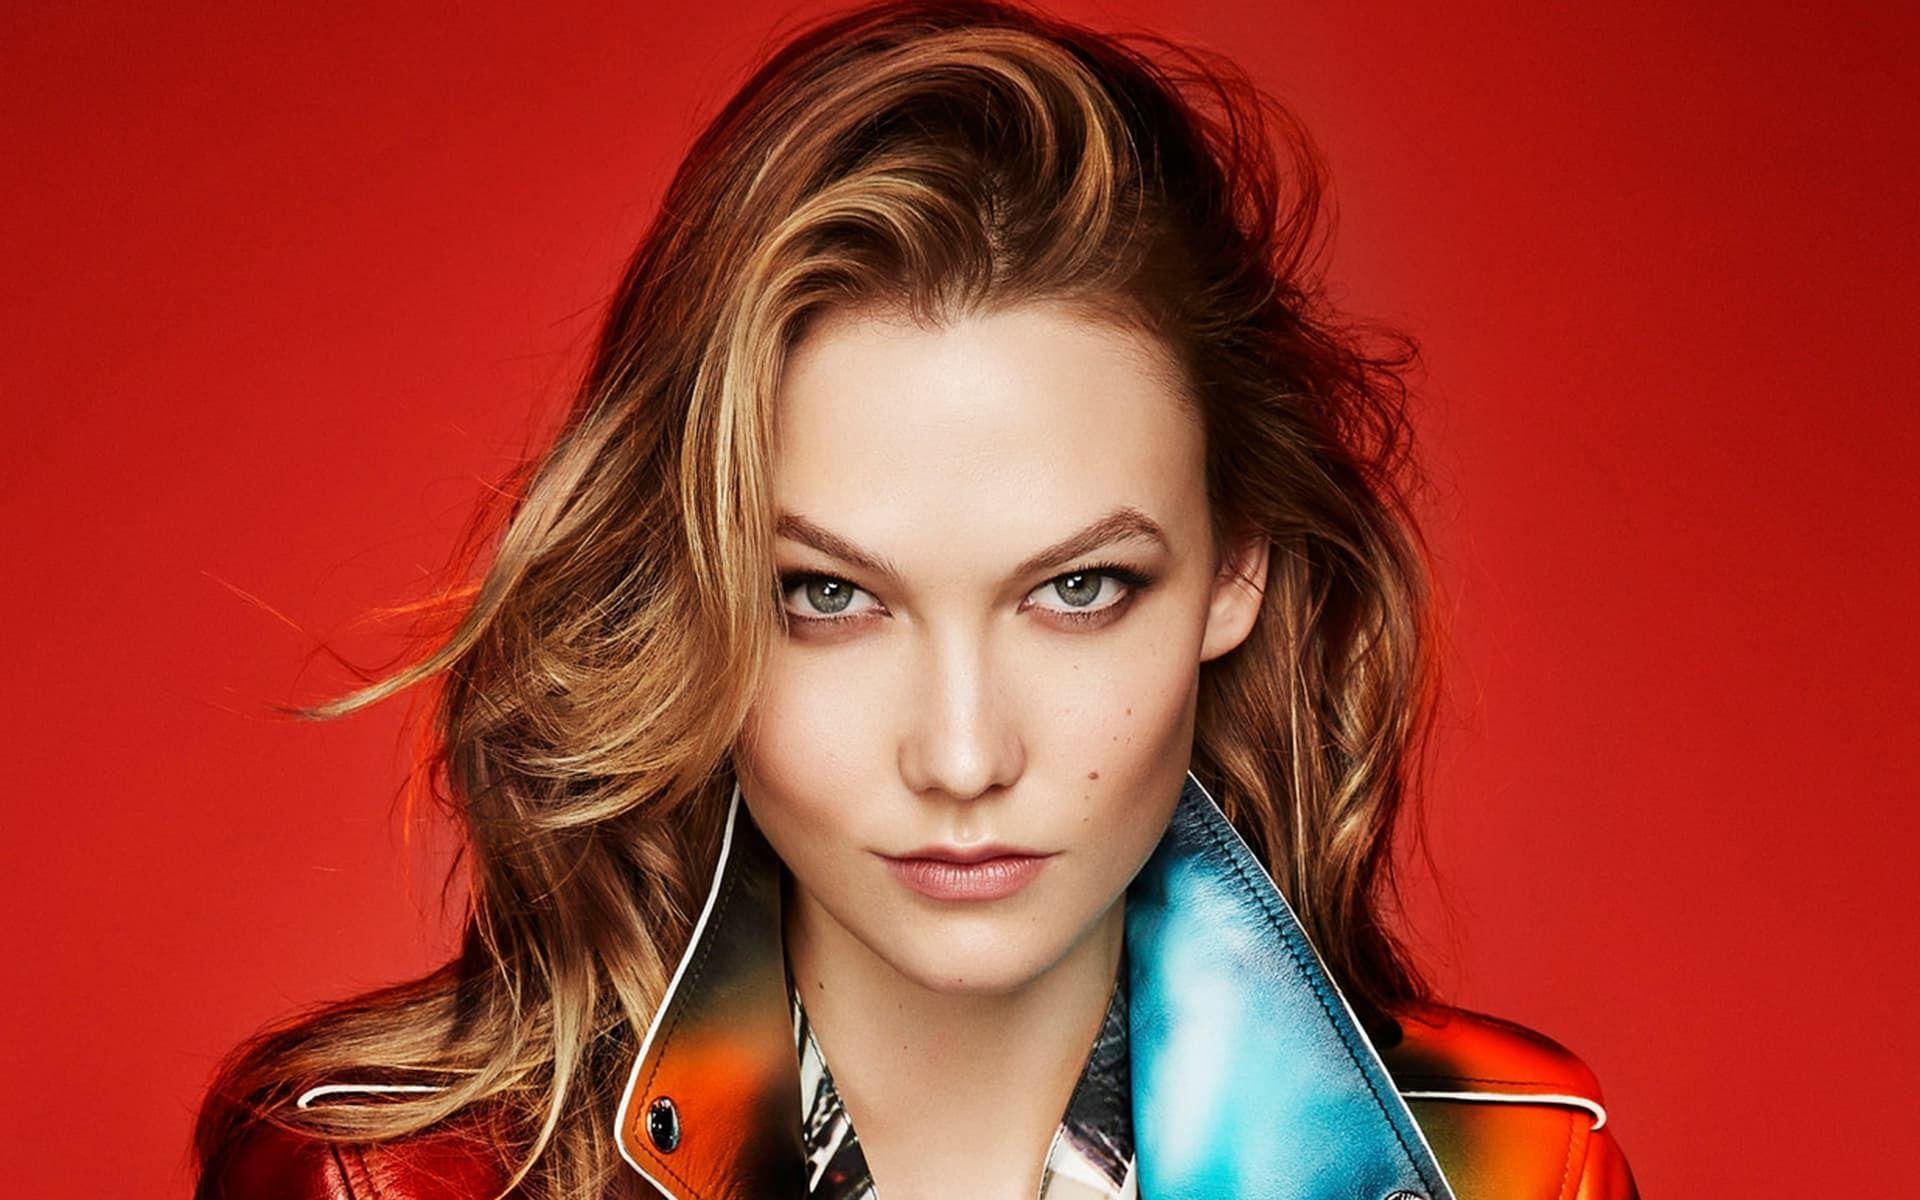 Karlie Kloss Wallpaper Image Photo Picture Background